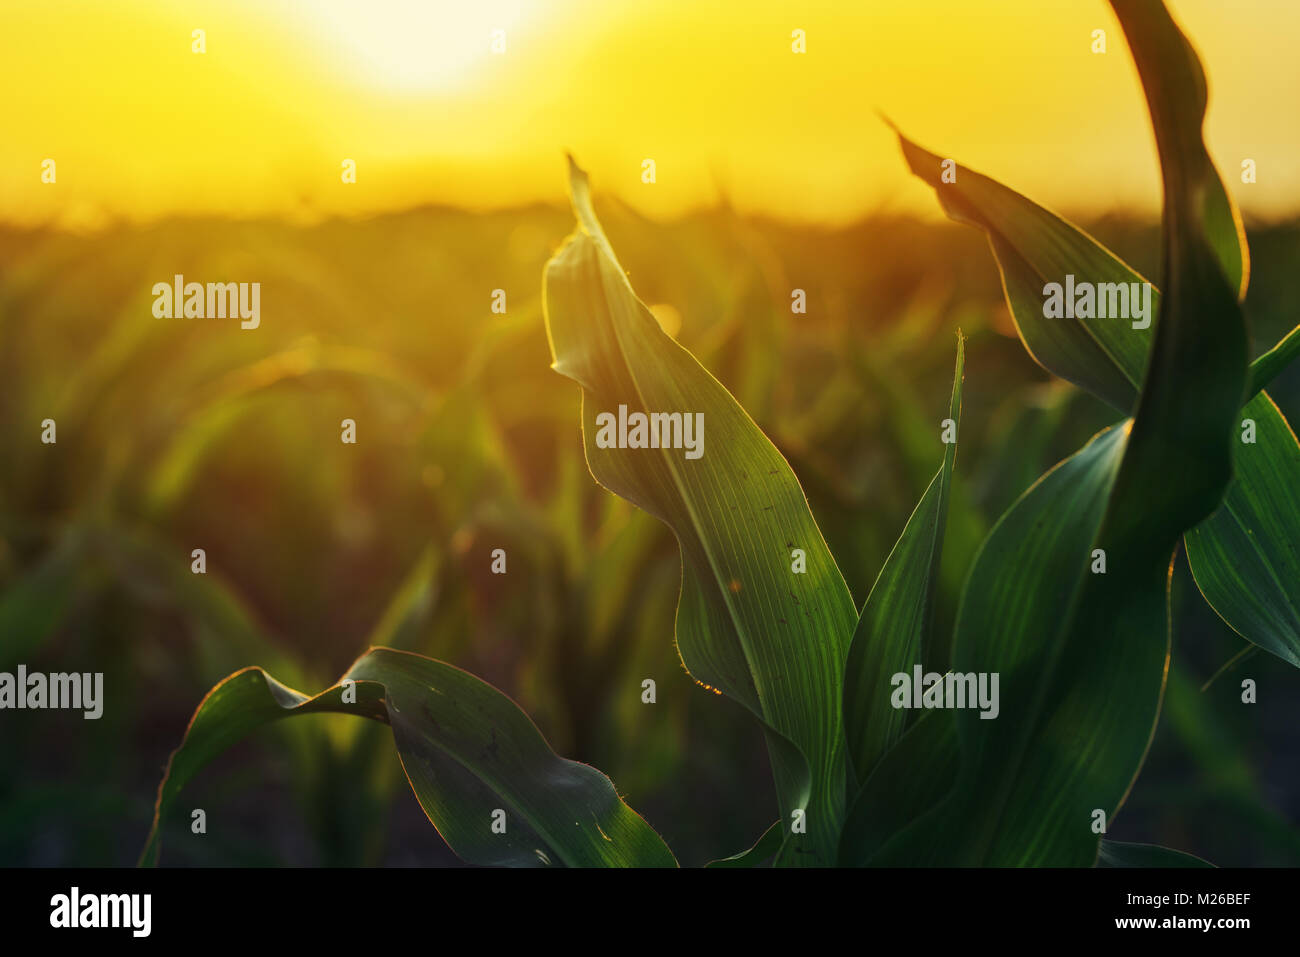 Corn plantation in sunset, maize crop plants growing in field Stock Photo